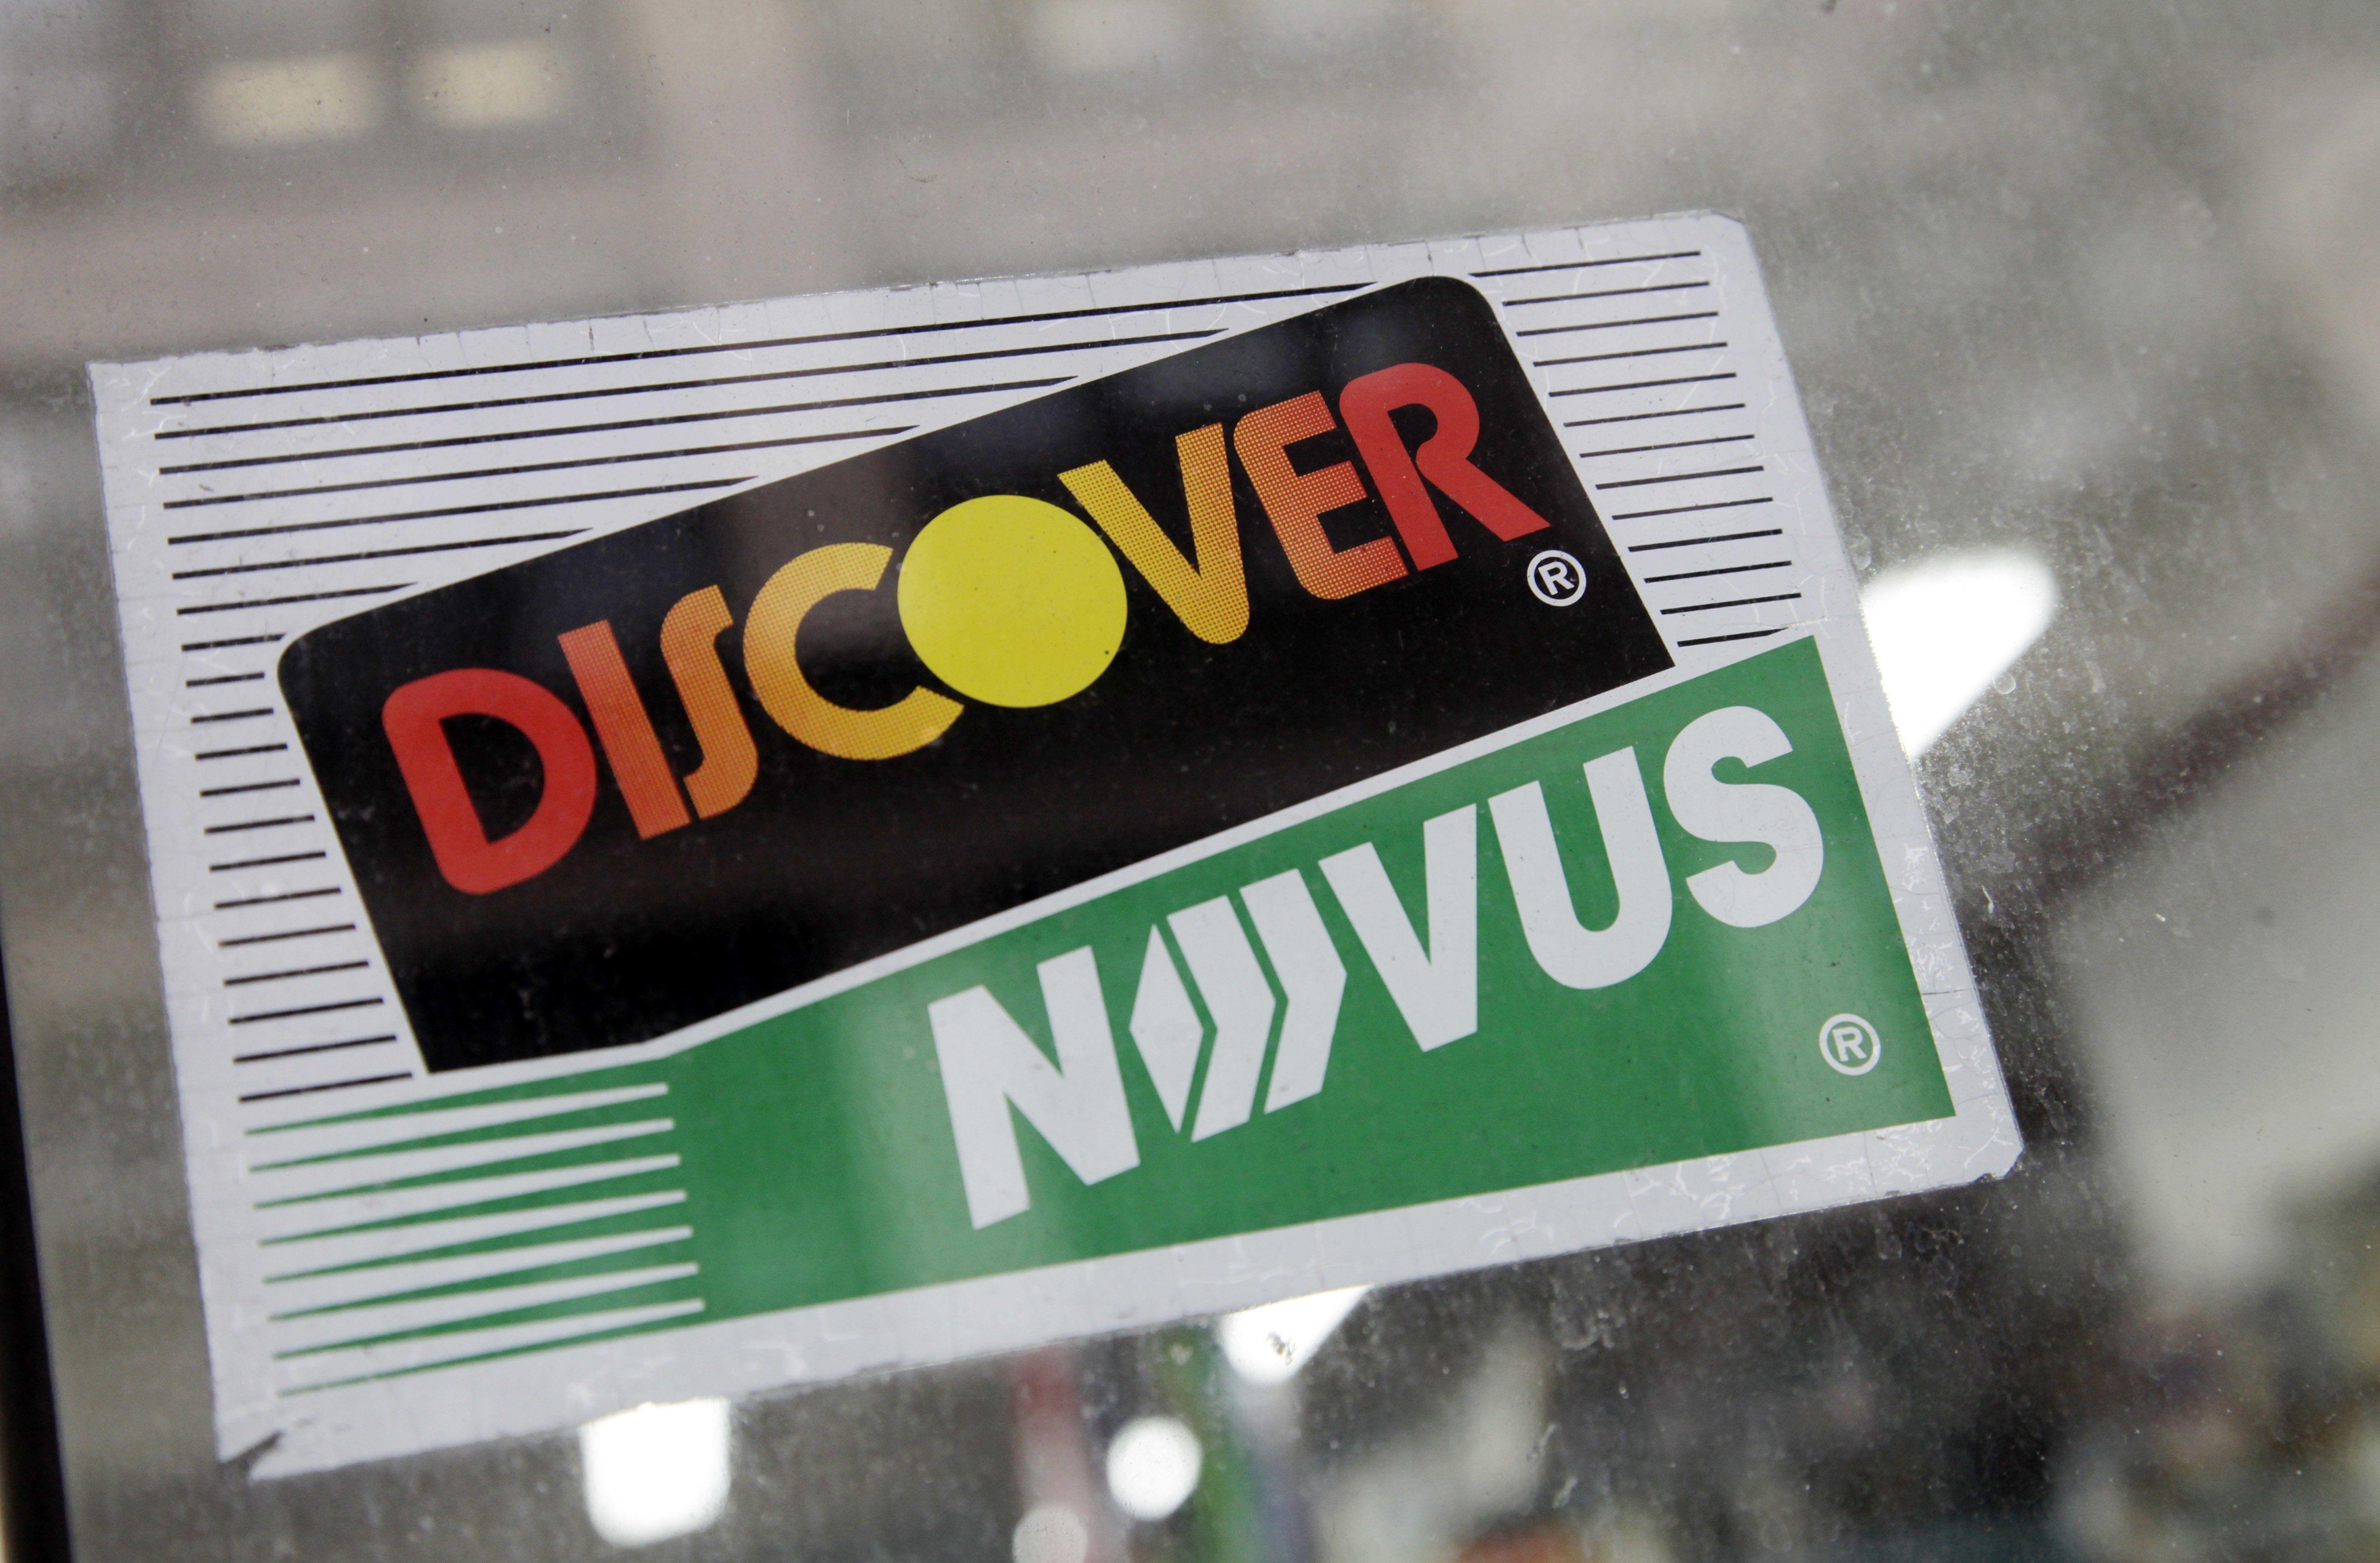 Discover Novus Logo - Discover Financial's Profit Rises on Loan Growth